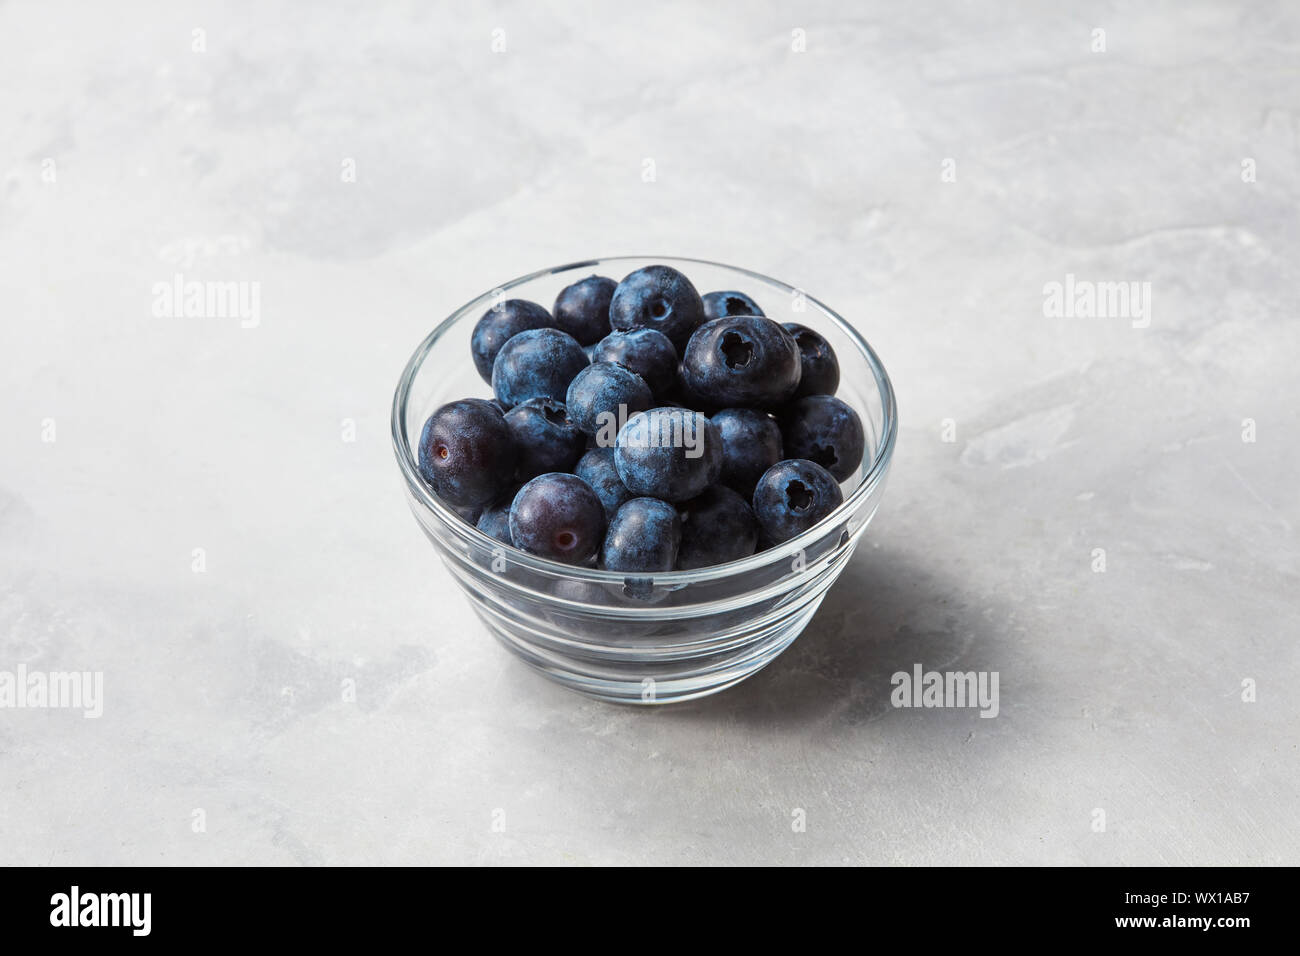 Blueberries in is a small glass bowl on gray stone background Stock Photo